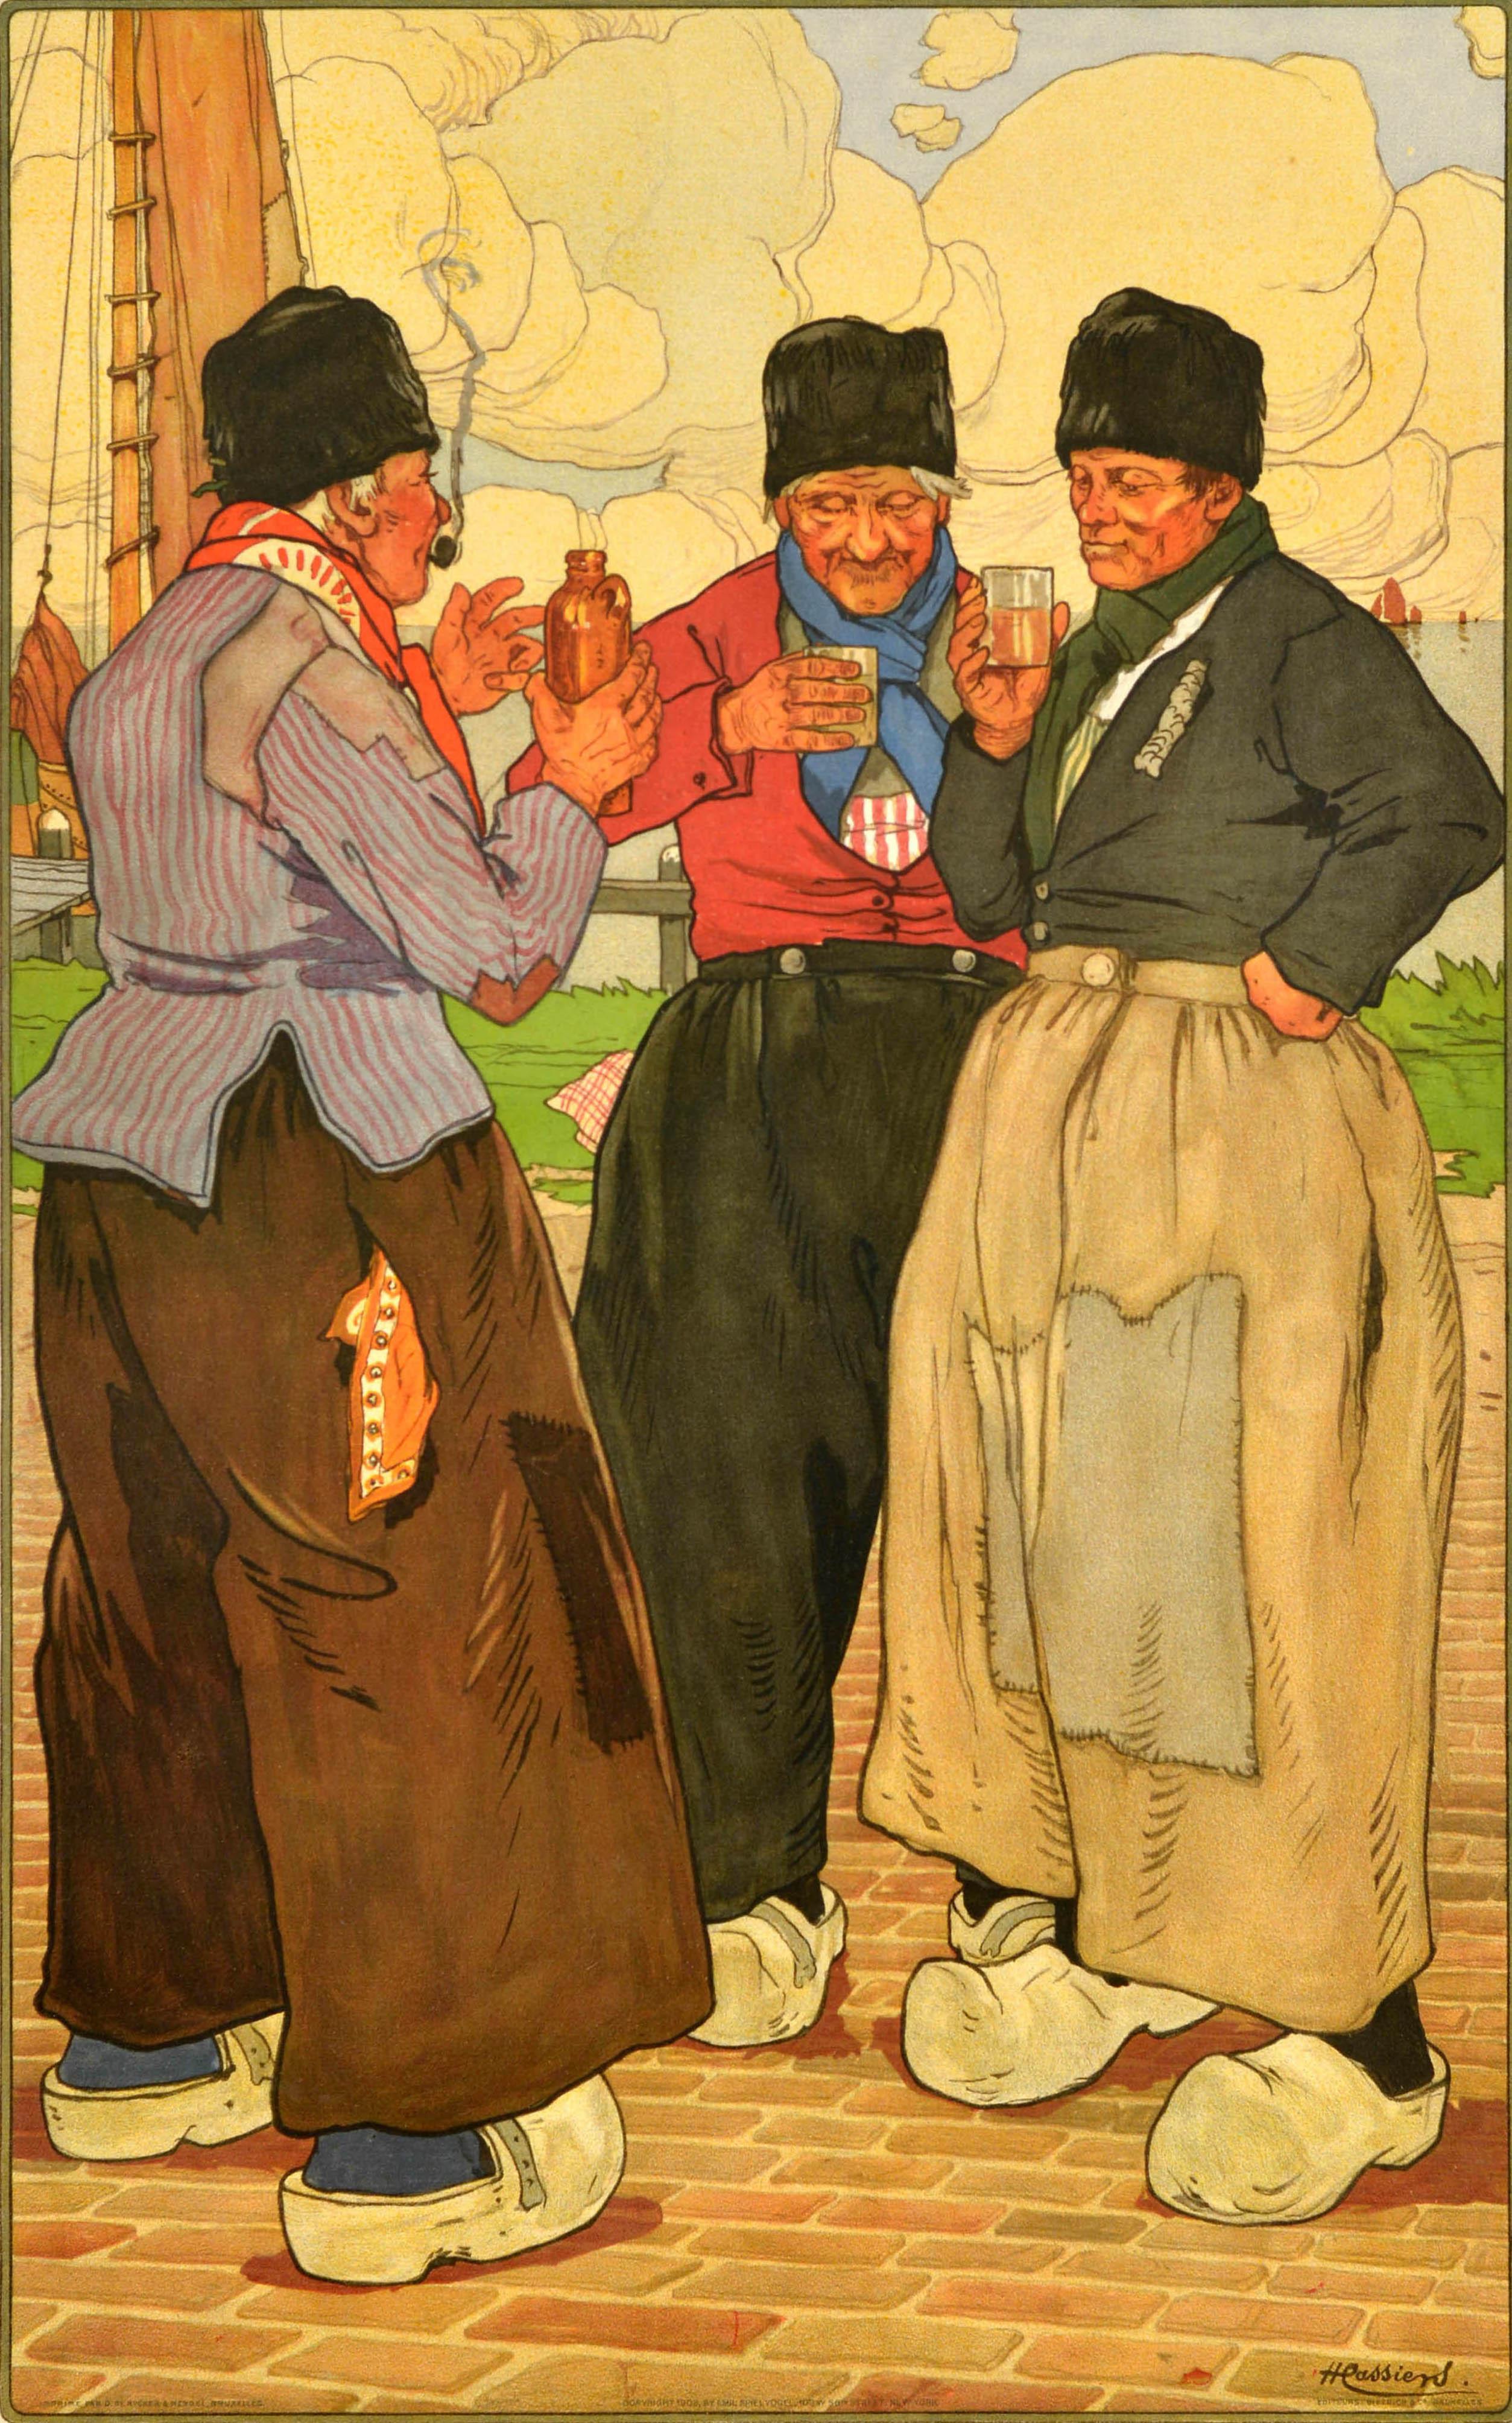 Original antique travel poster for Belgium featuring an illustration by Henri Cassiers (1858-1944) depicting three fishermen standing together in traditional clog shoes enjoying a drink on cobblestones, one smoking a pipe and holding a stoneware